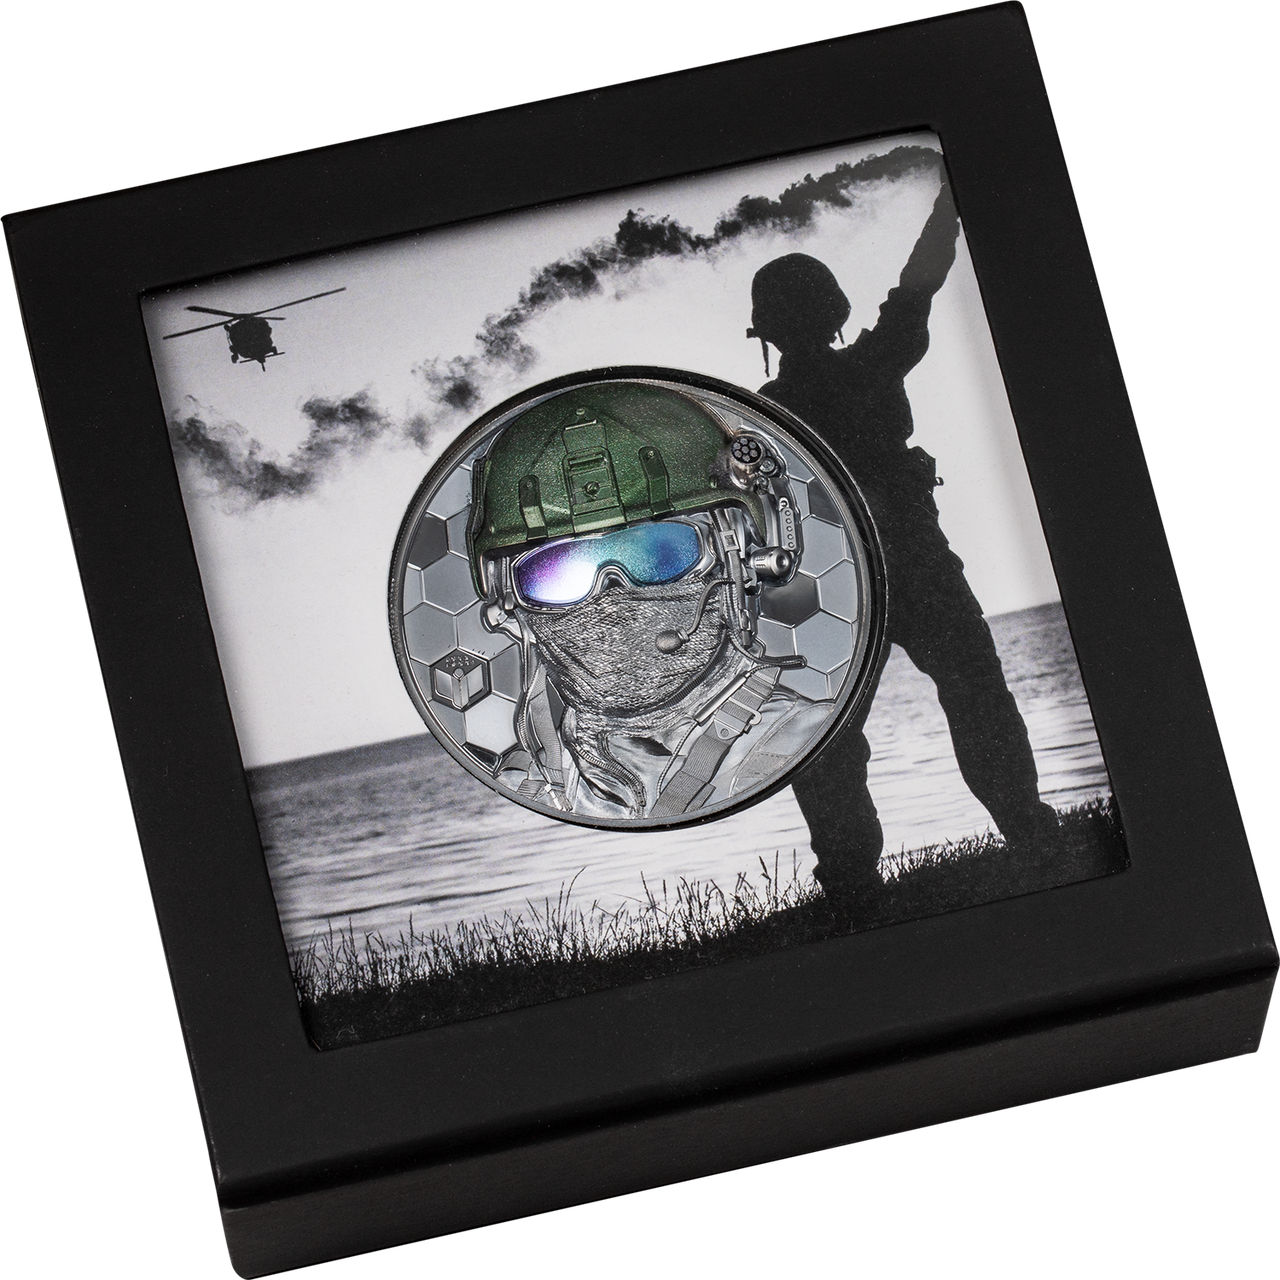 2022 Cook Islands $20 Silver Proof Coin - Real Heroes - Special Forces